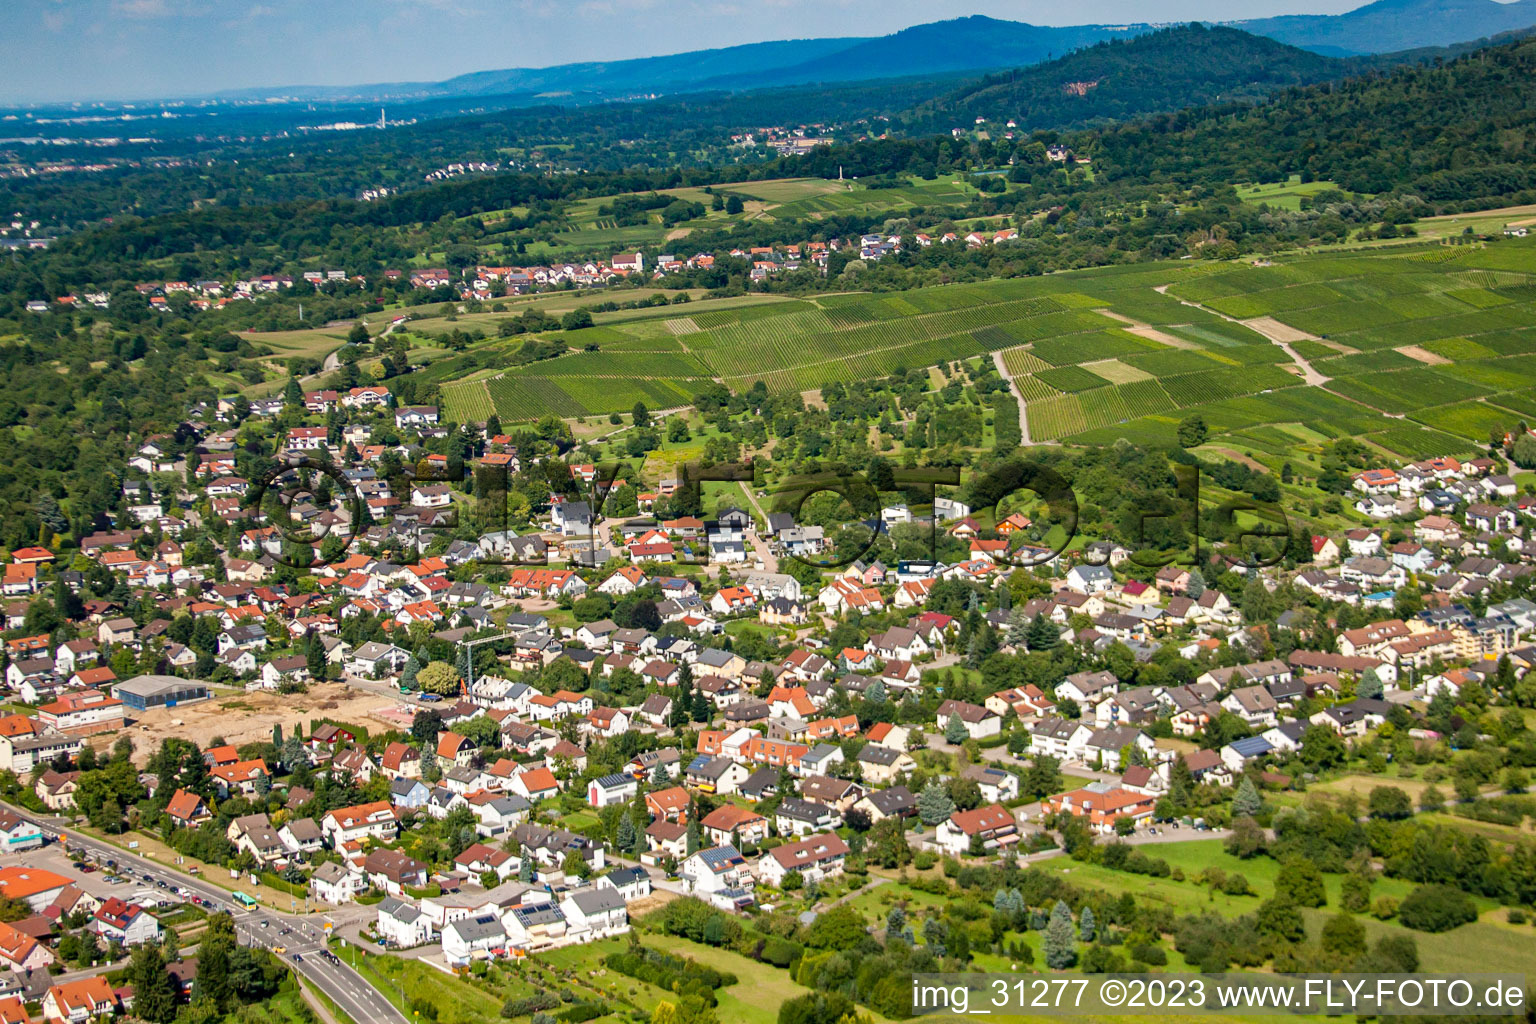 From the south in Sinzheim in the state Baden-Wuerttemberg, Germany